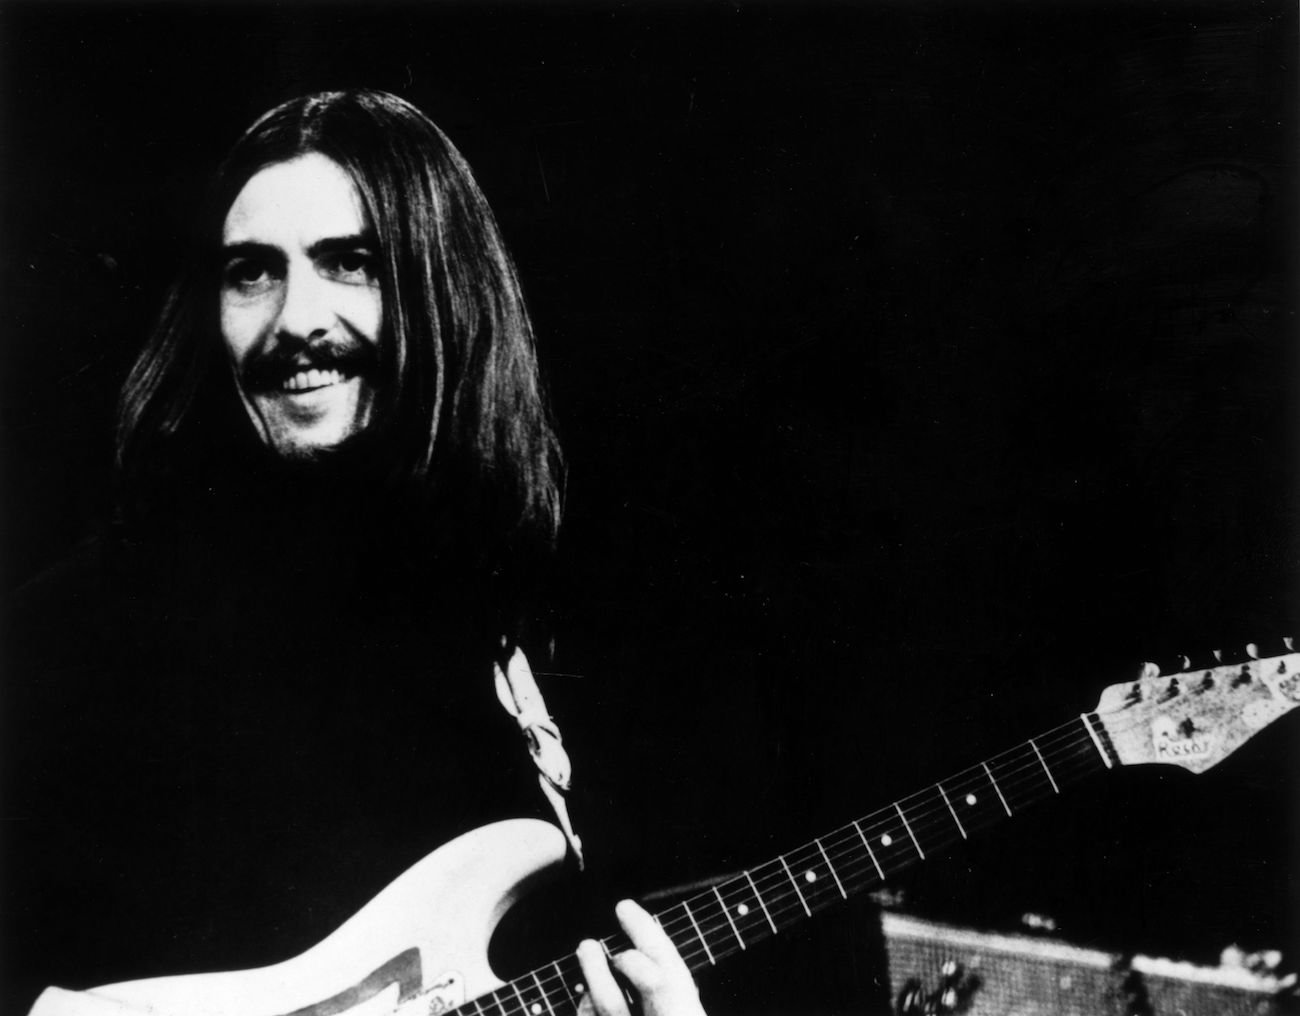 George Harrison playing guitar in 1969.